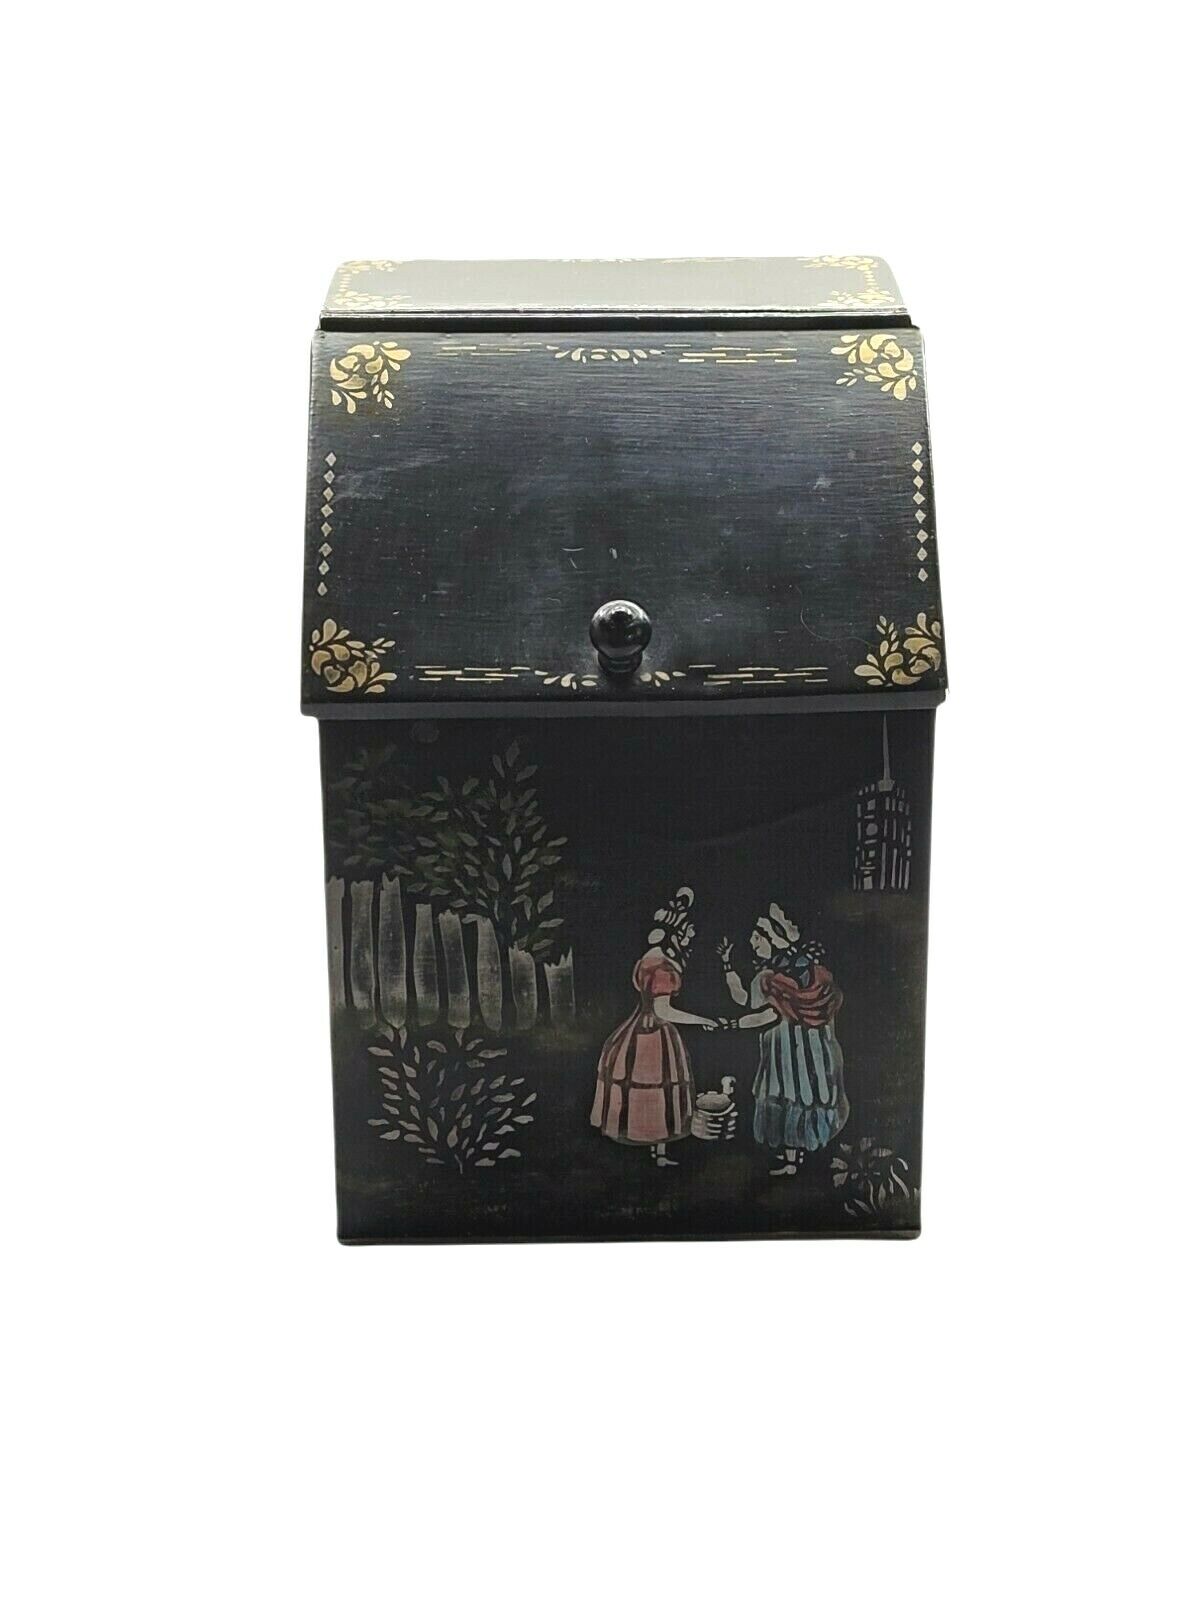 Vintage Black Metal Hand Painted Box With Exquisite art